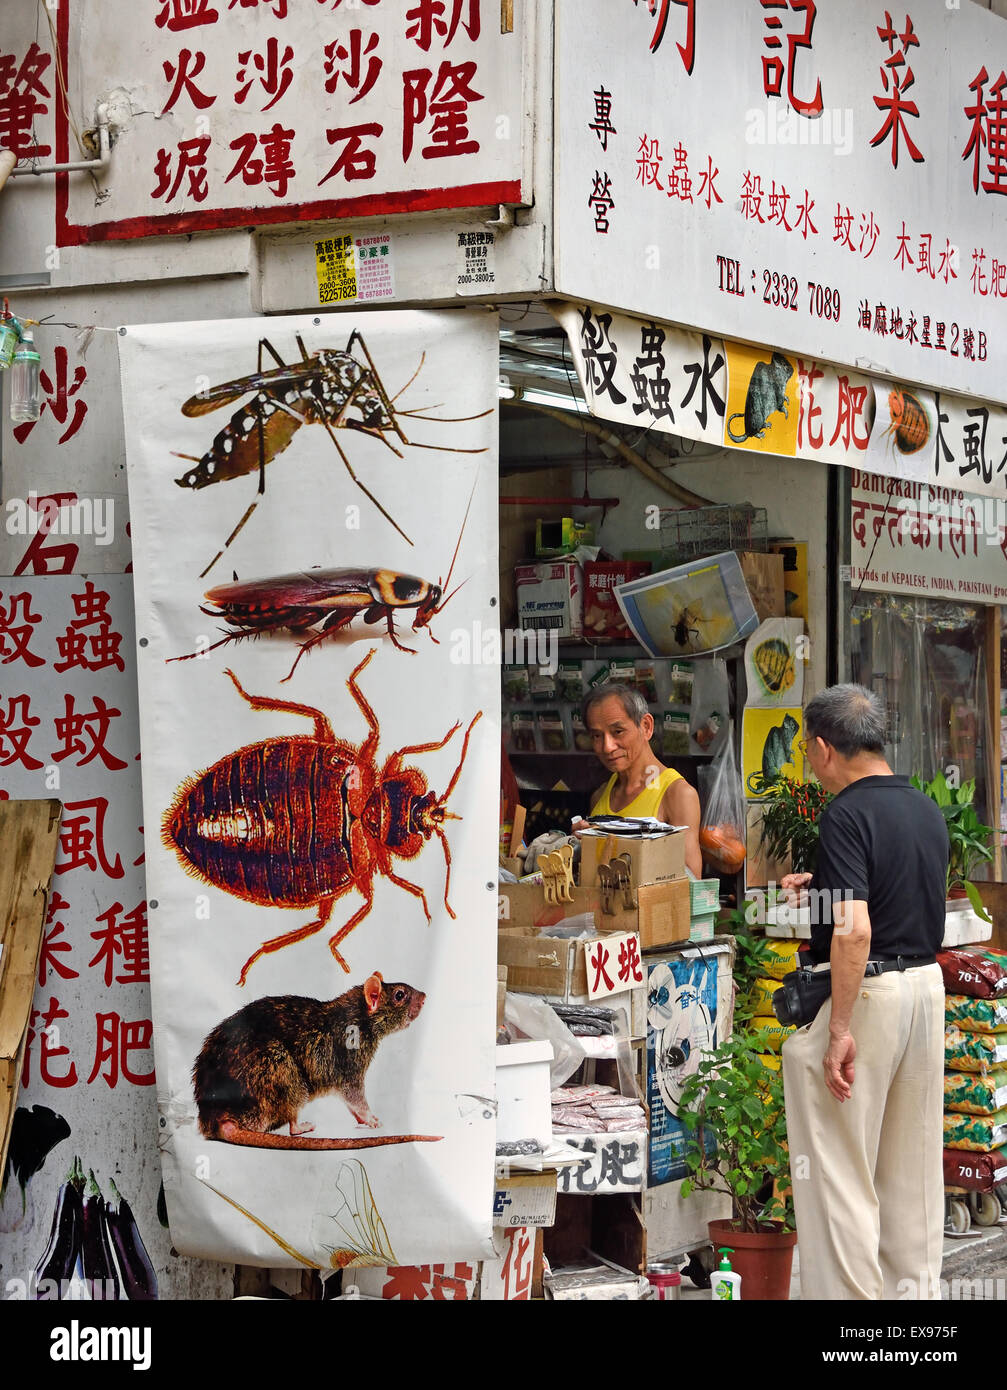 Shanghai China insecticide rat pest control shop Stock Photo - Alamy